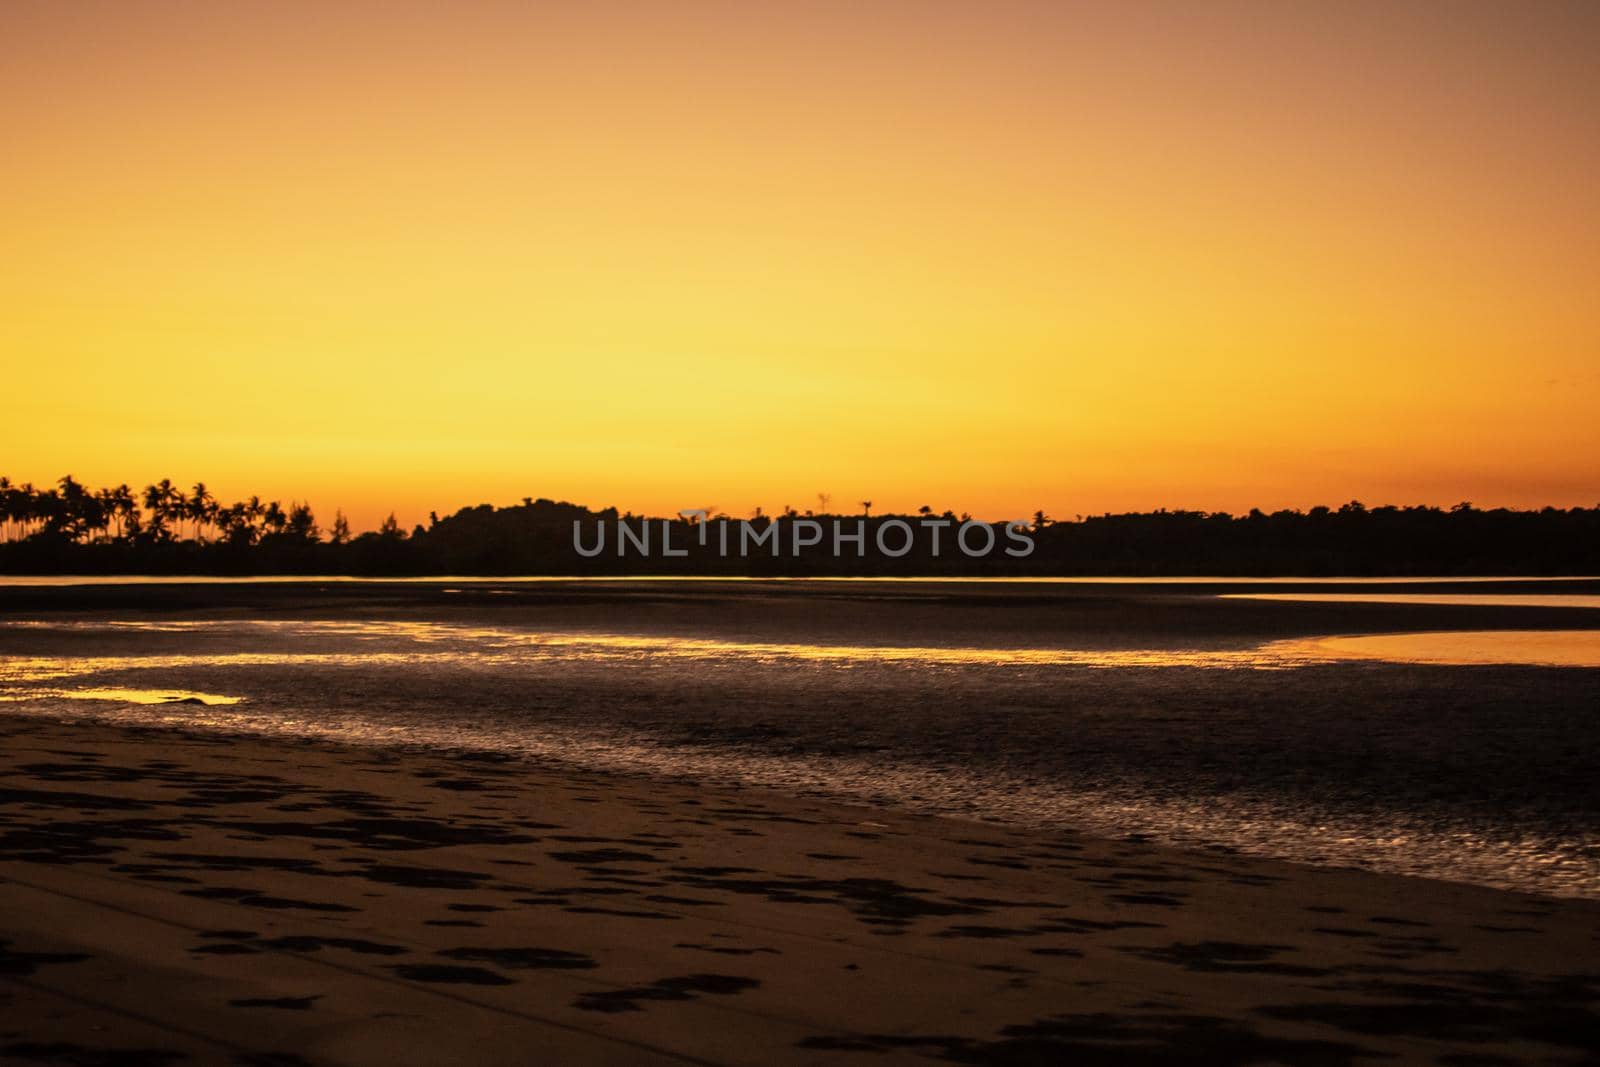 A sand beach during low tide and sunset near Ngwesaung, Myanmar by arvidnorberg